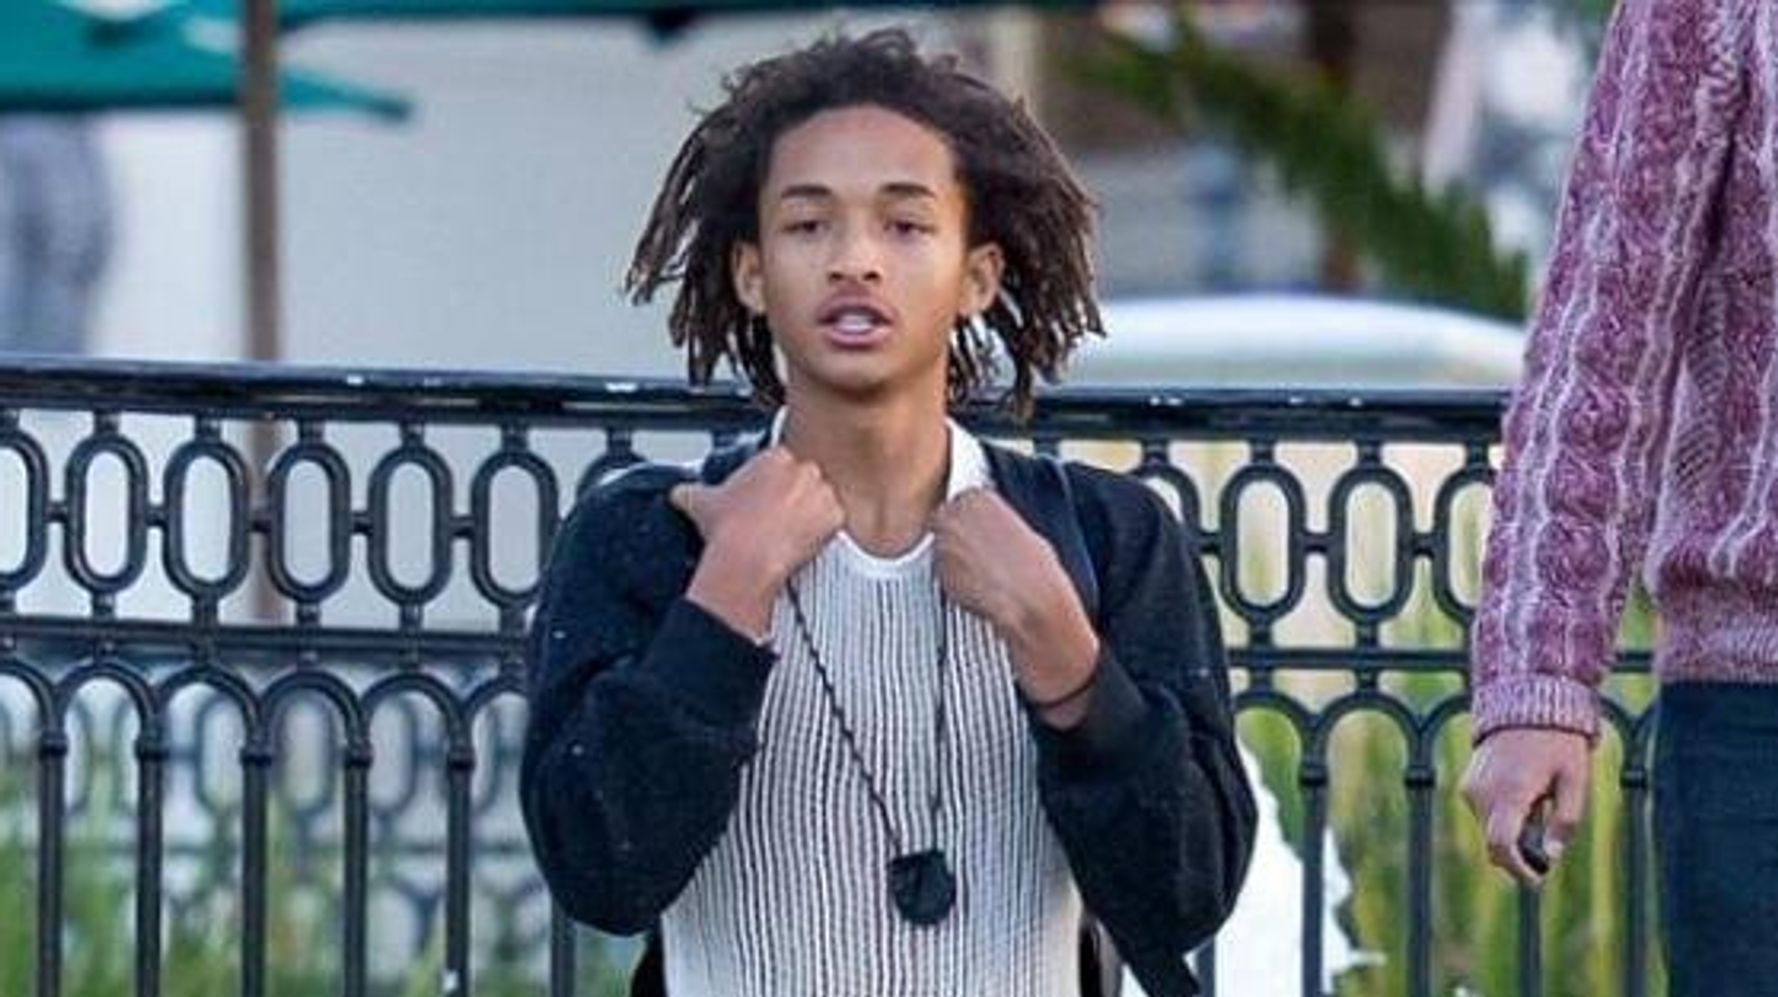 Jaden Smith Wears a Dress, Doesn't Care What You Think